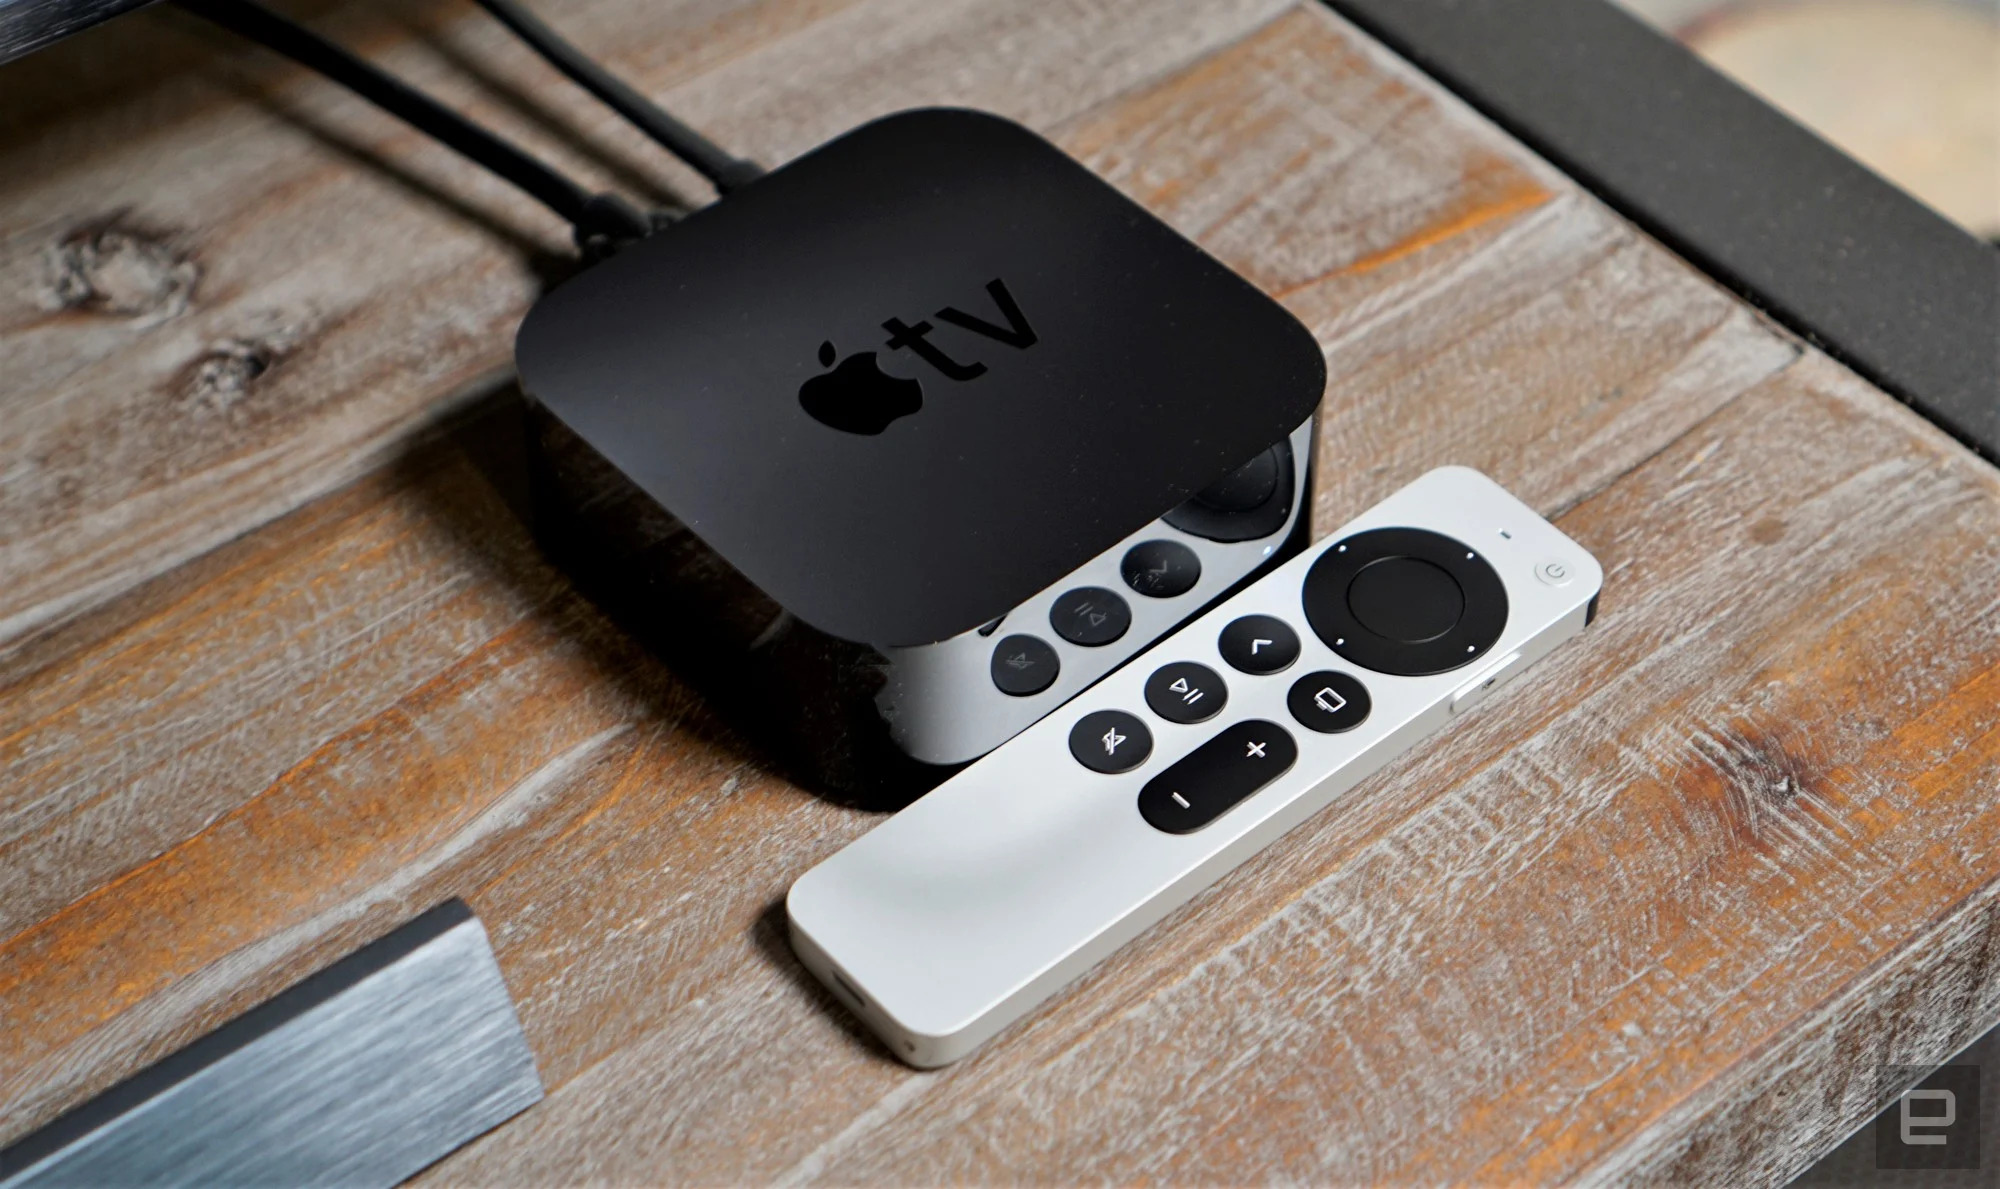 The 2021 Apple TV 4K drops to $120 at Amazon